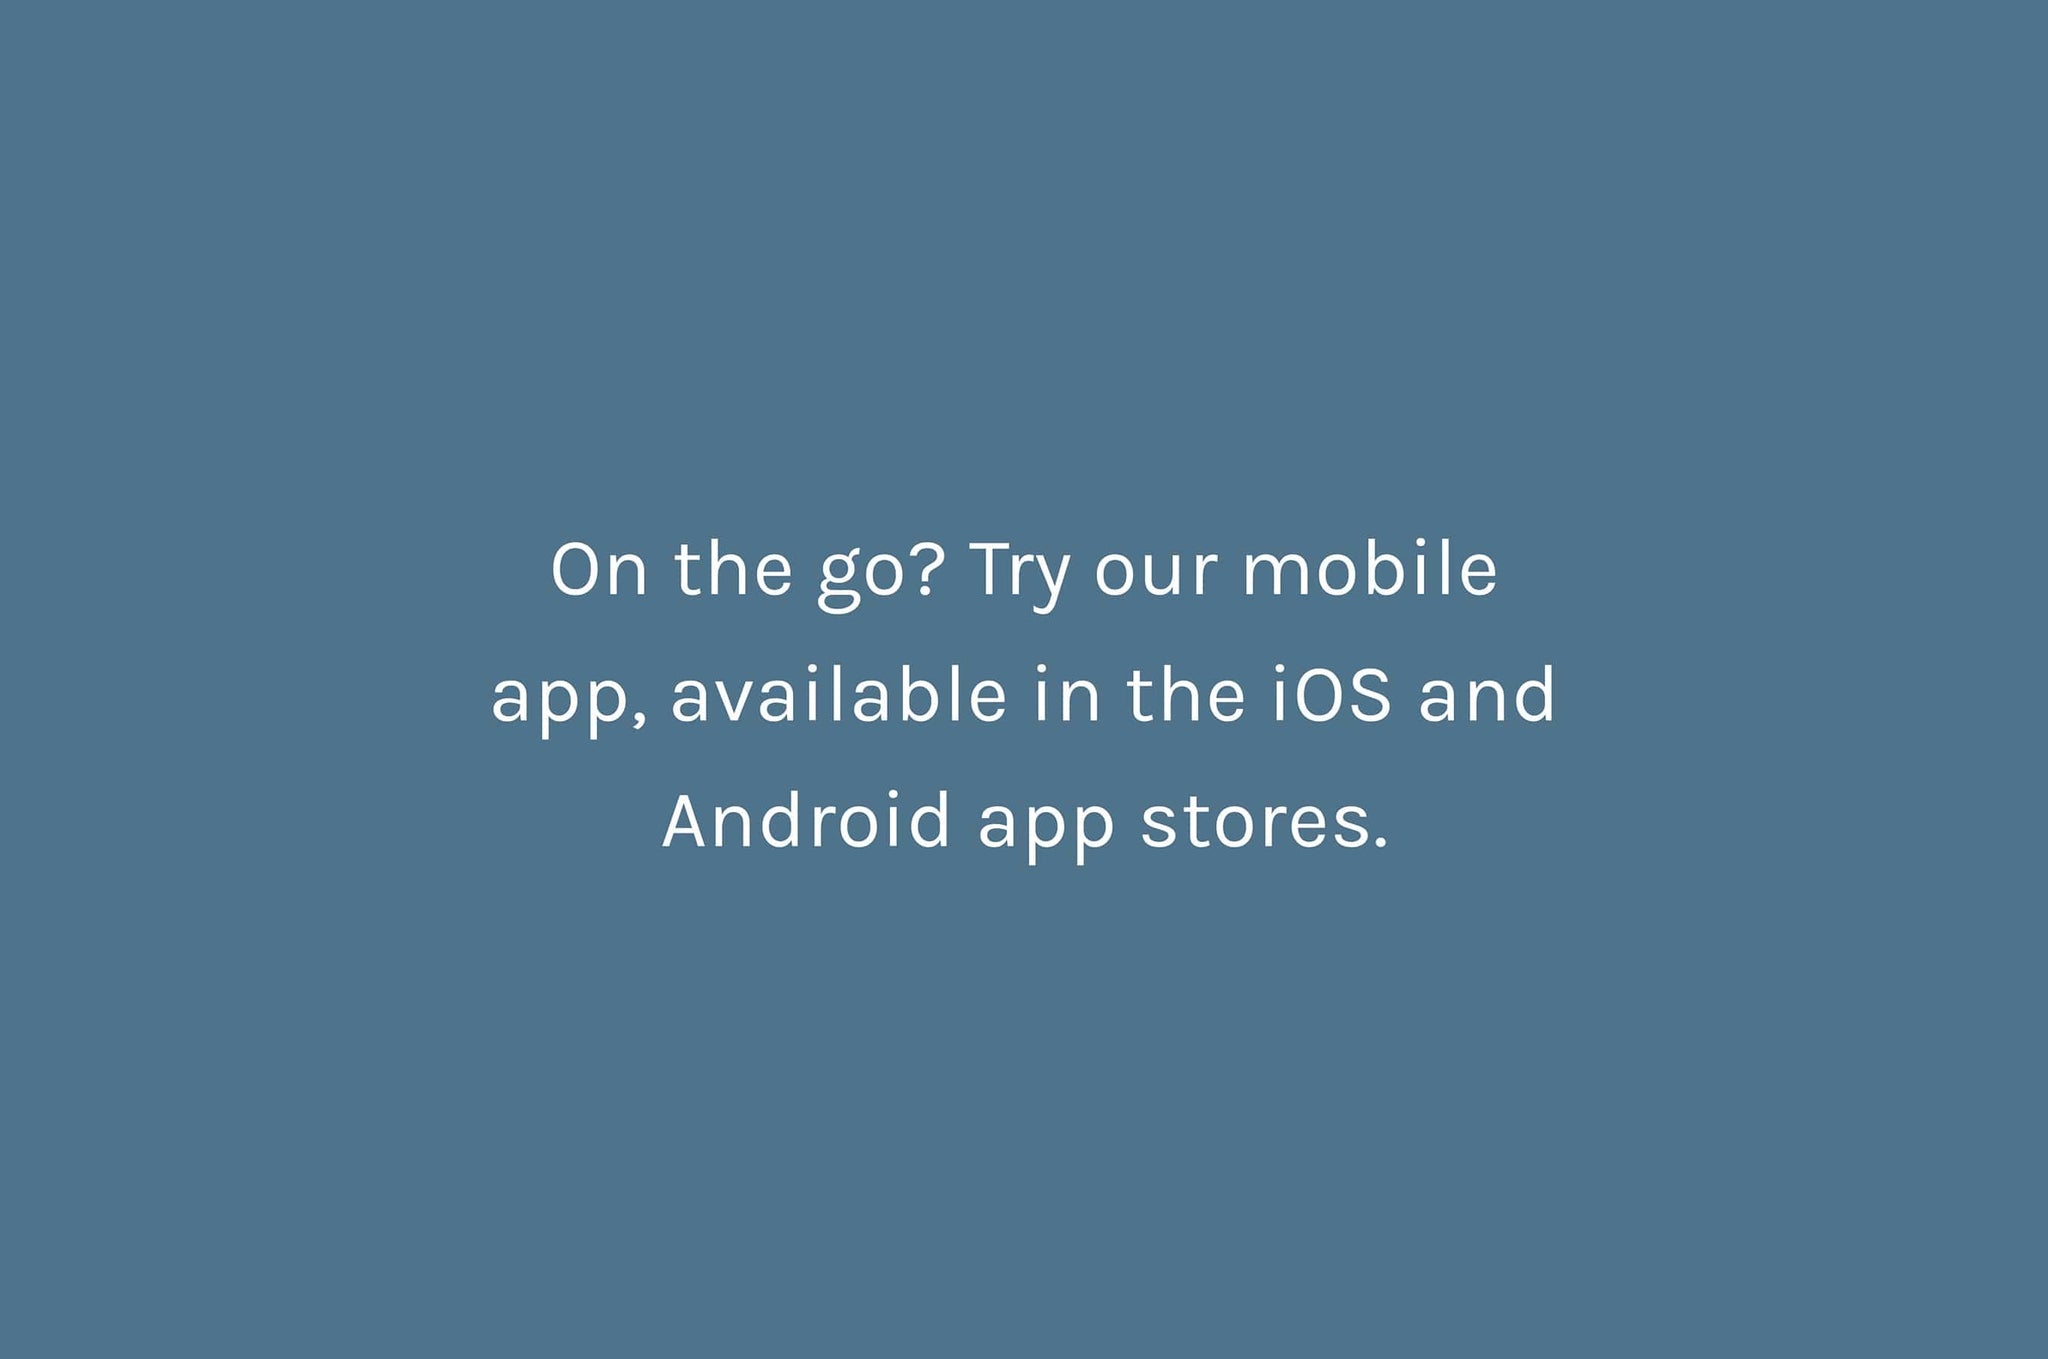 On the go? Try our mobile app, available in the iOS and Android app stores.